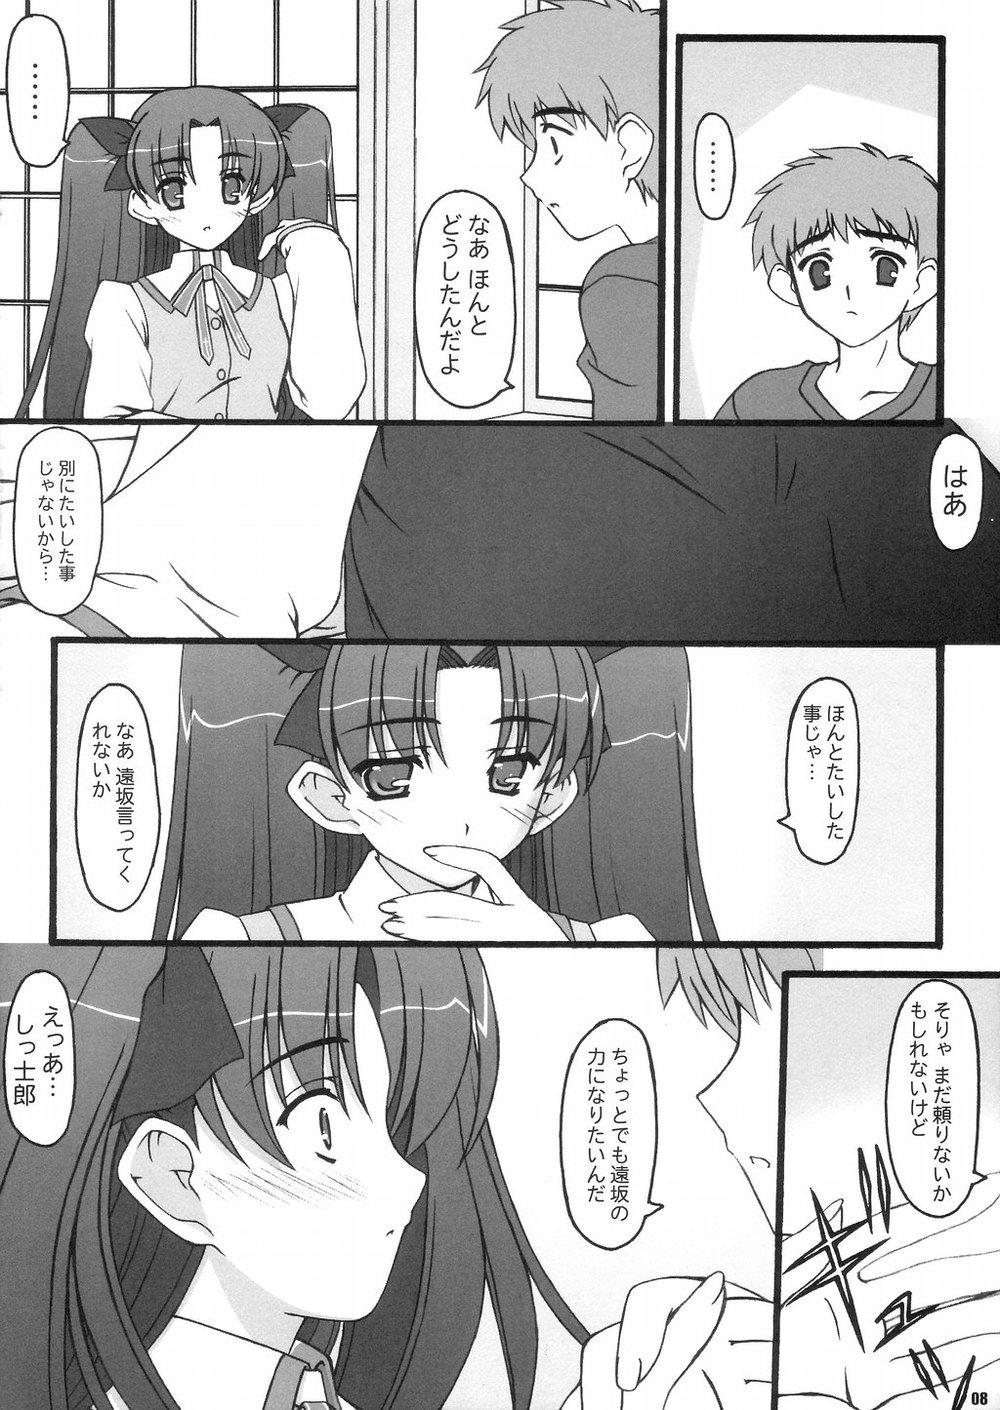 Youth Porn Fight - Fate stay night Com - Page 7